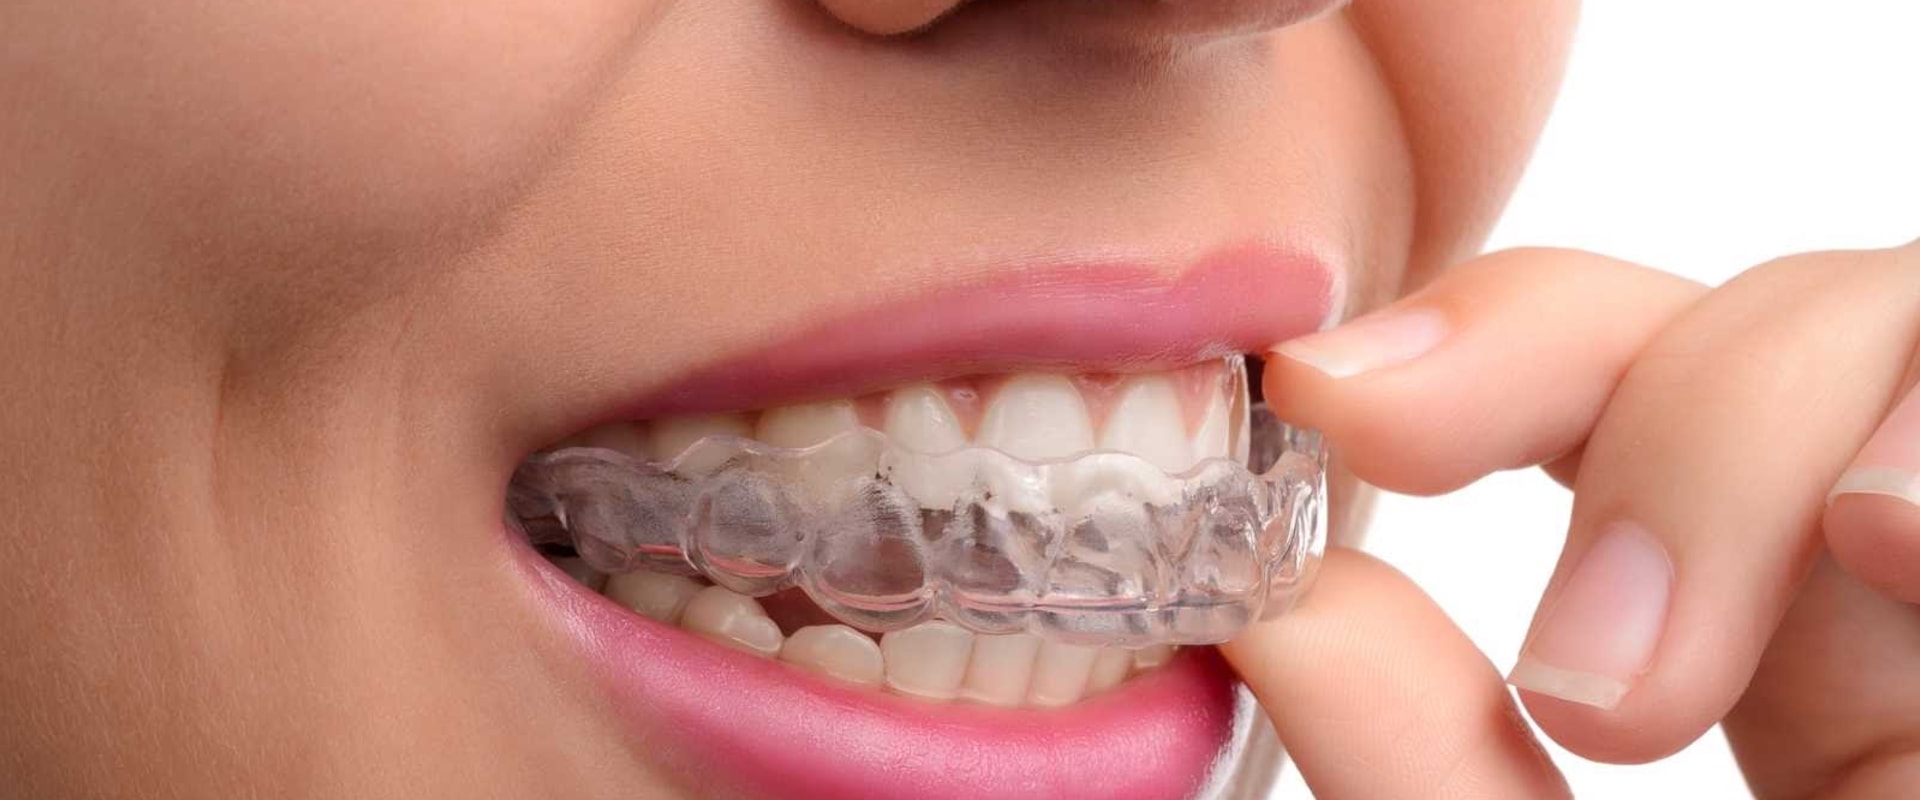 Can I Whiten My Teeth While Wearing Invisalign Aligners?